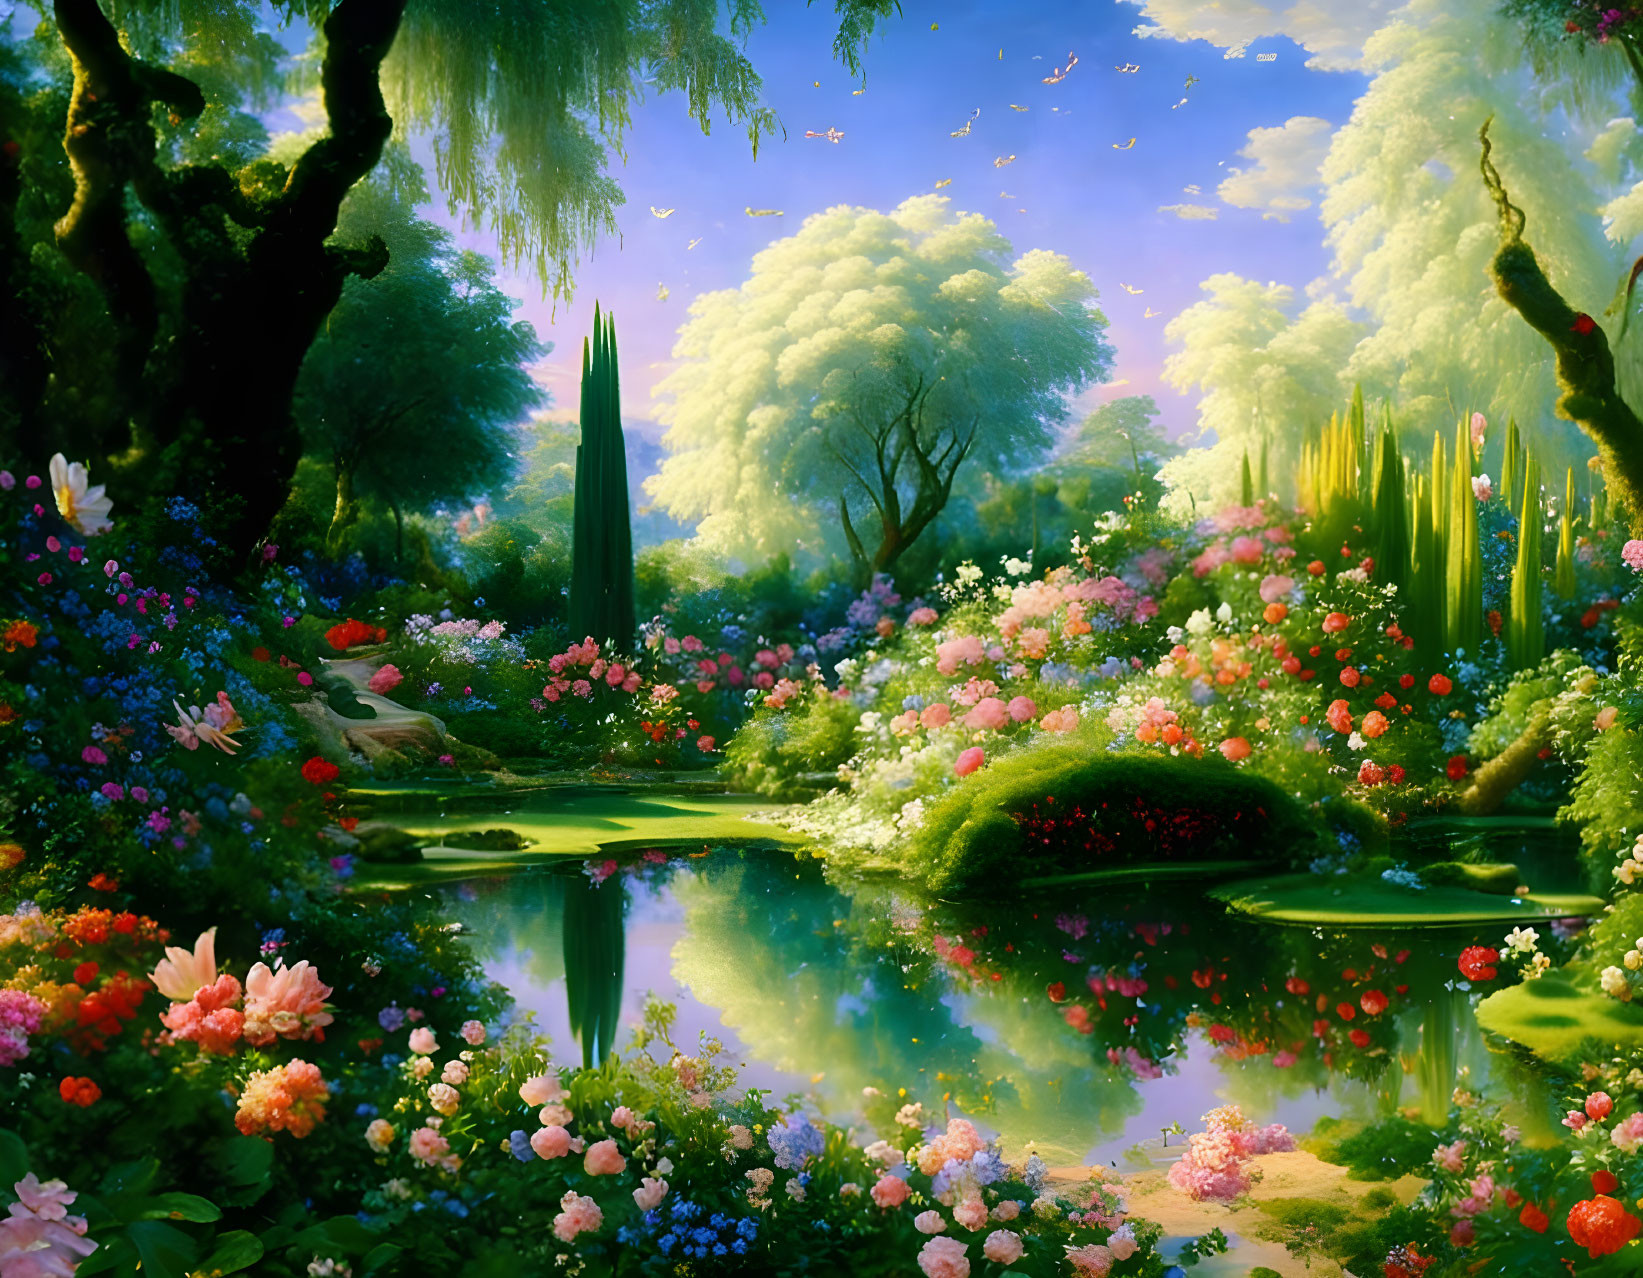 Fantastical landscape with lush greenery, colorful flowers, serene pond